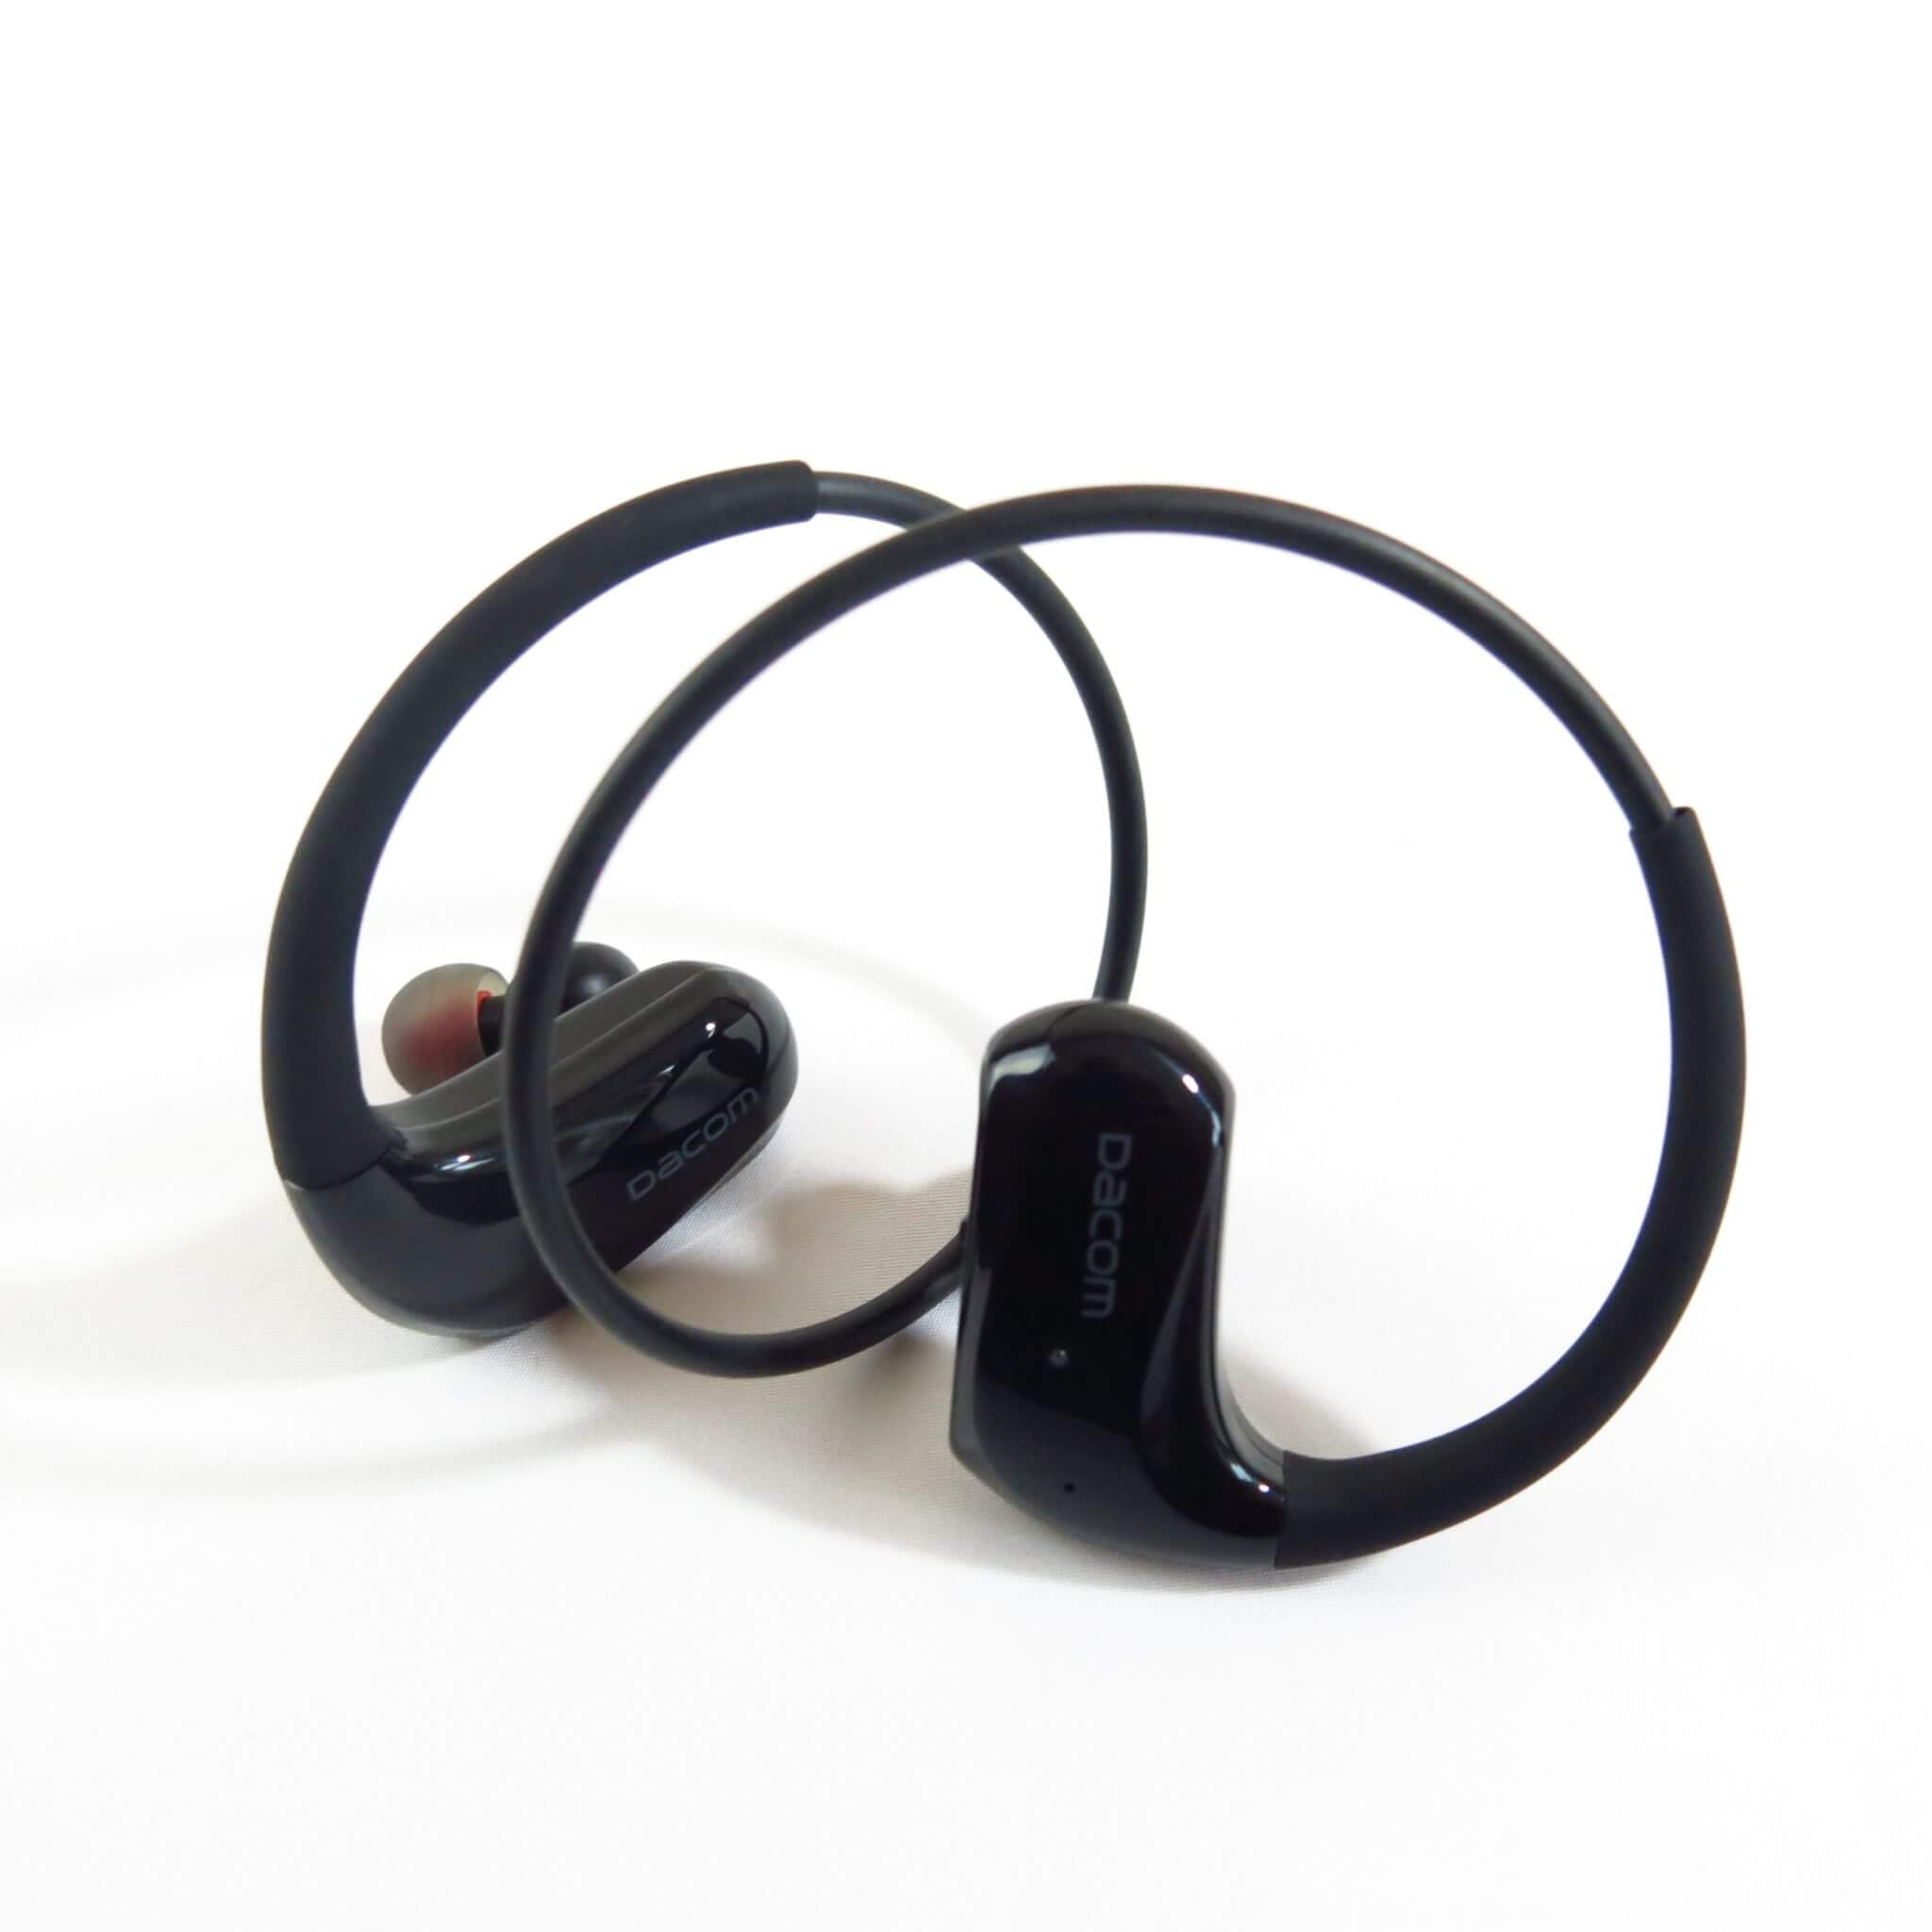 Old-Firm-Boots-Dacom-G93-Bluetooth-In-Ear-Wireless-Sports Running Headphones